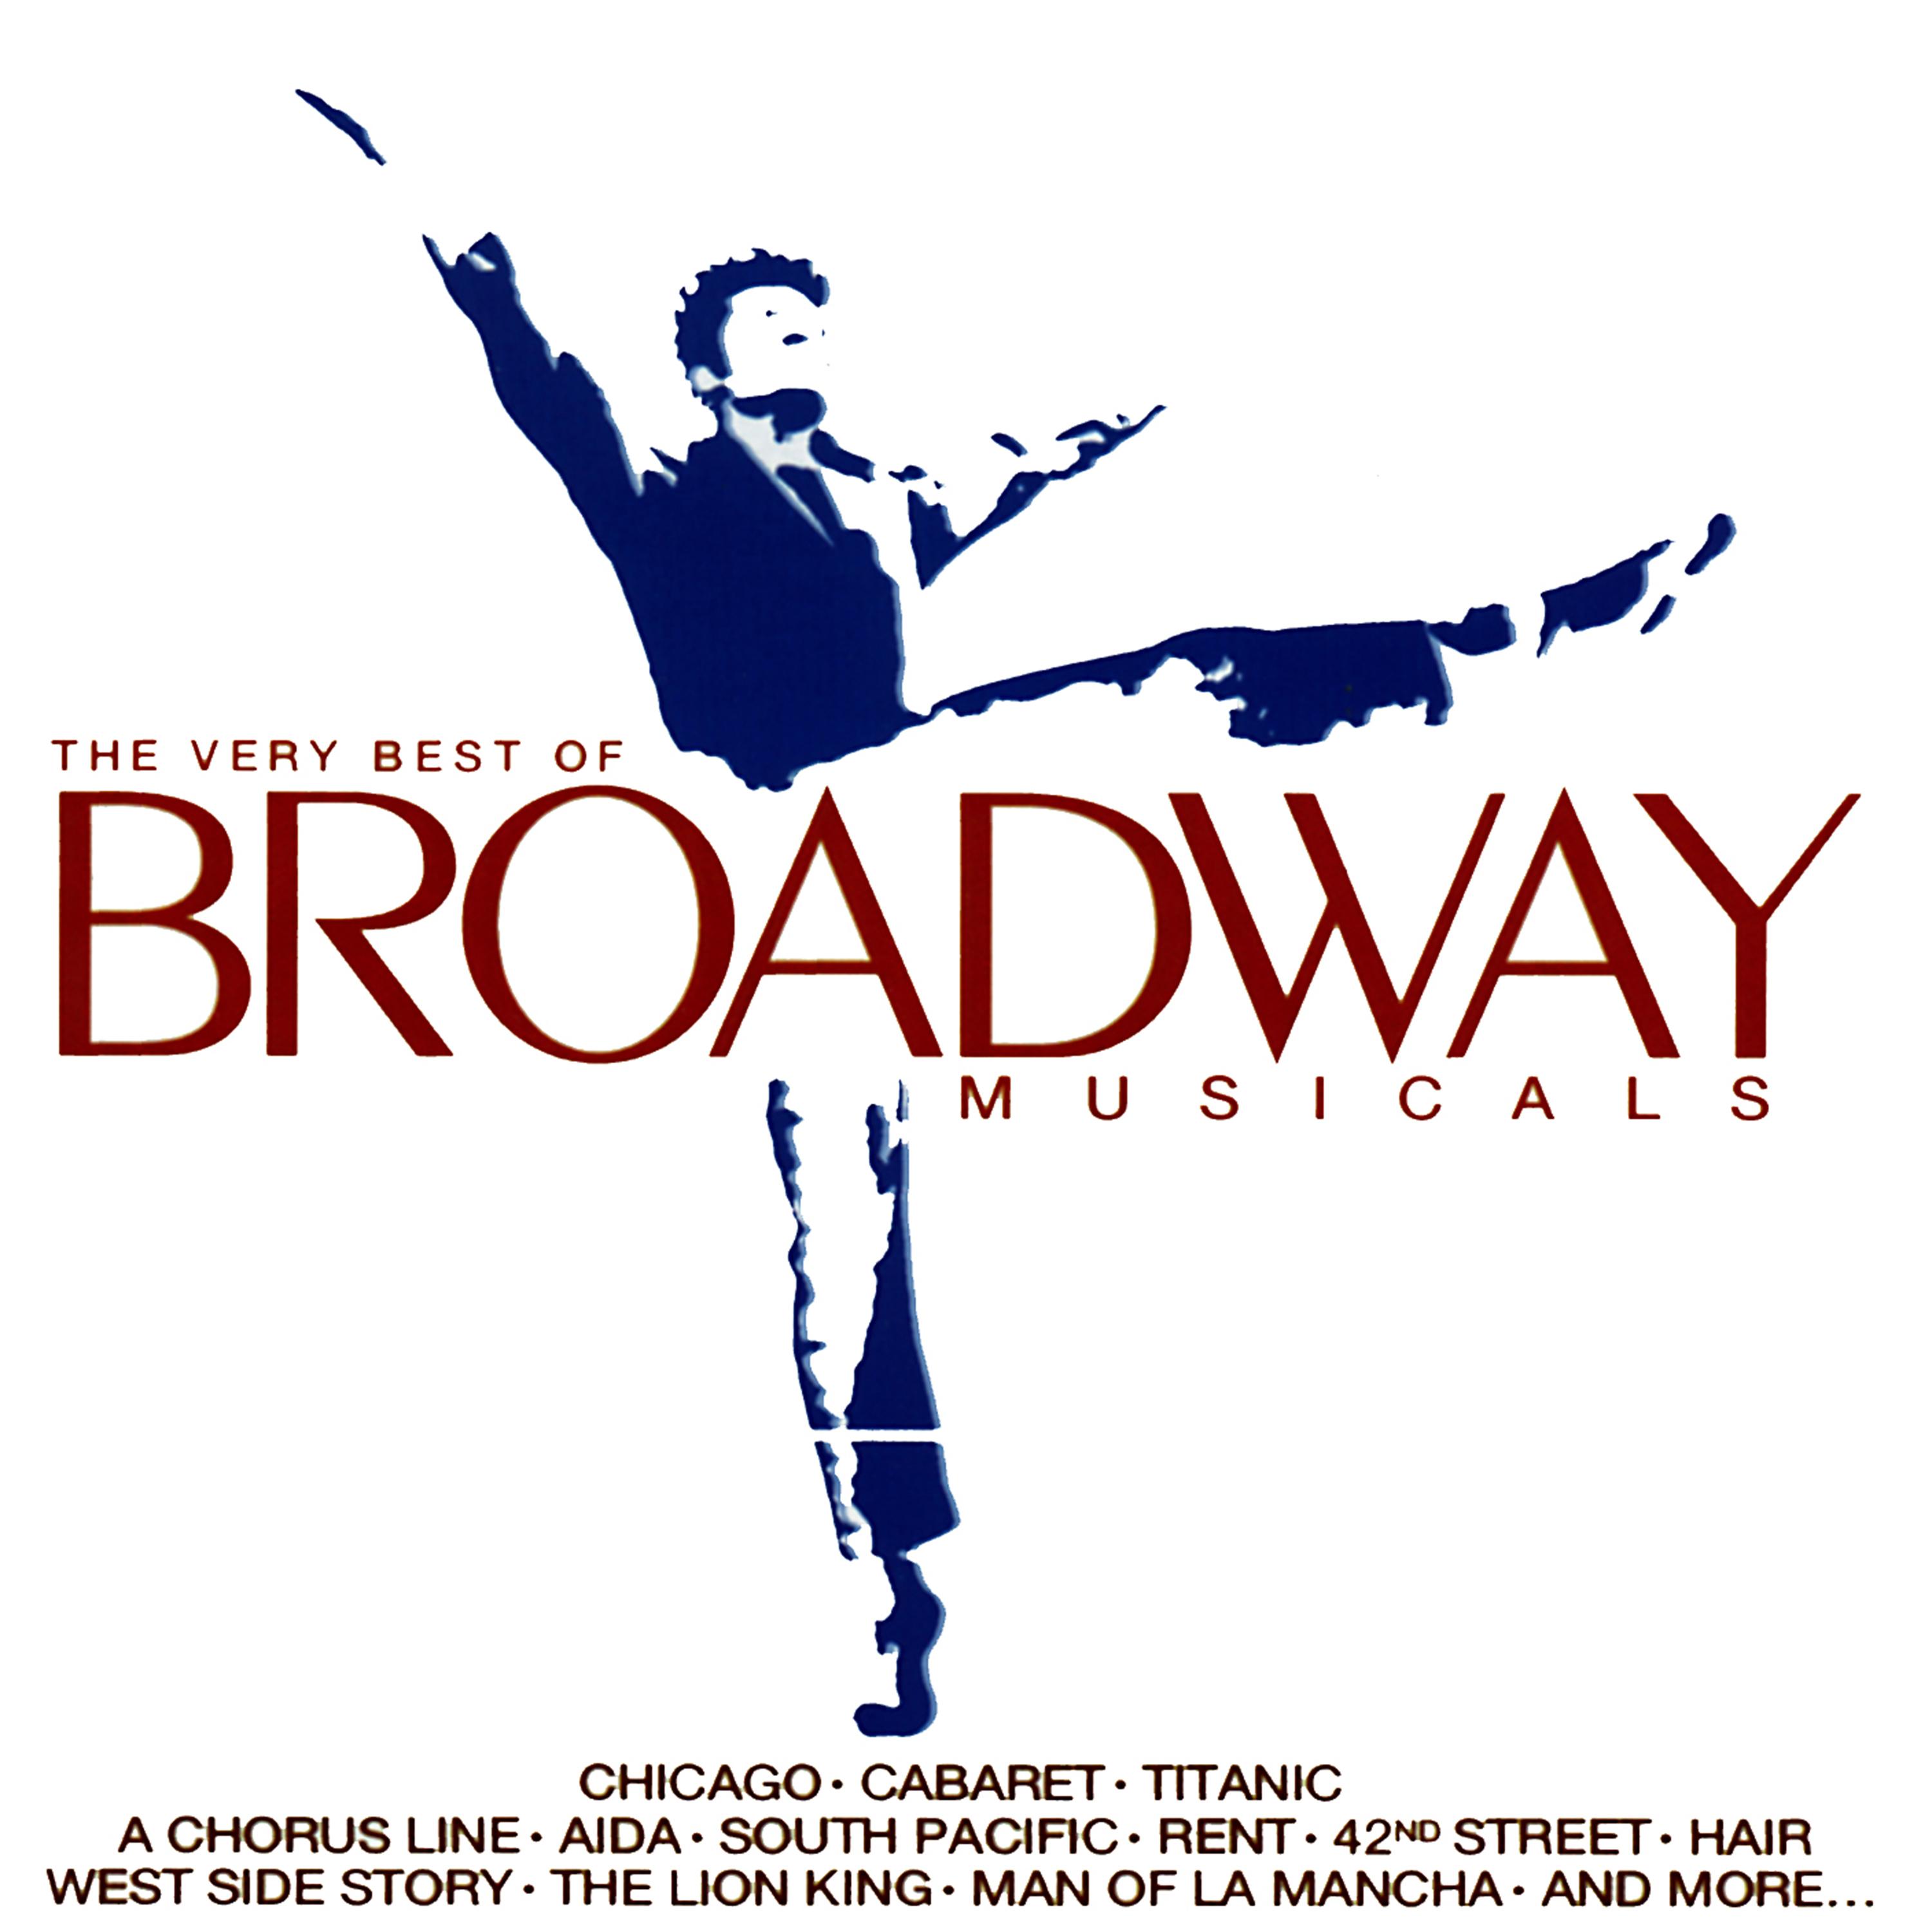 The Very Best of Broadway Musicals